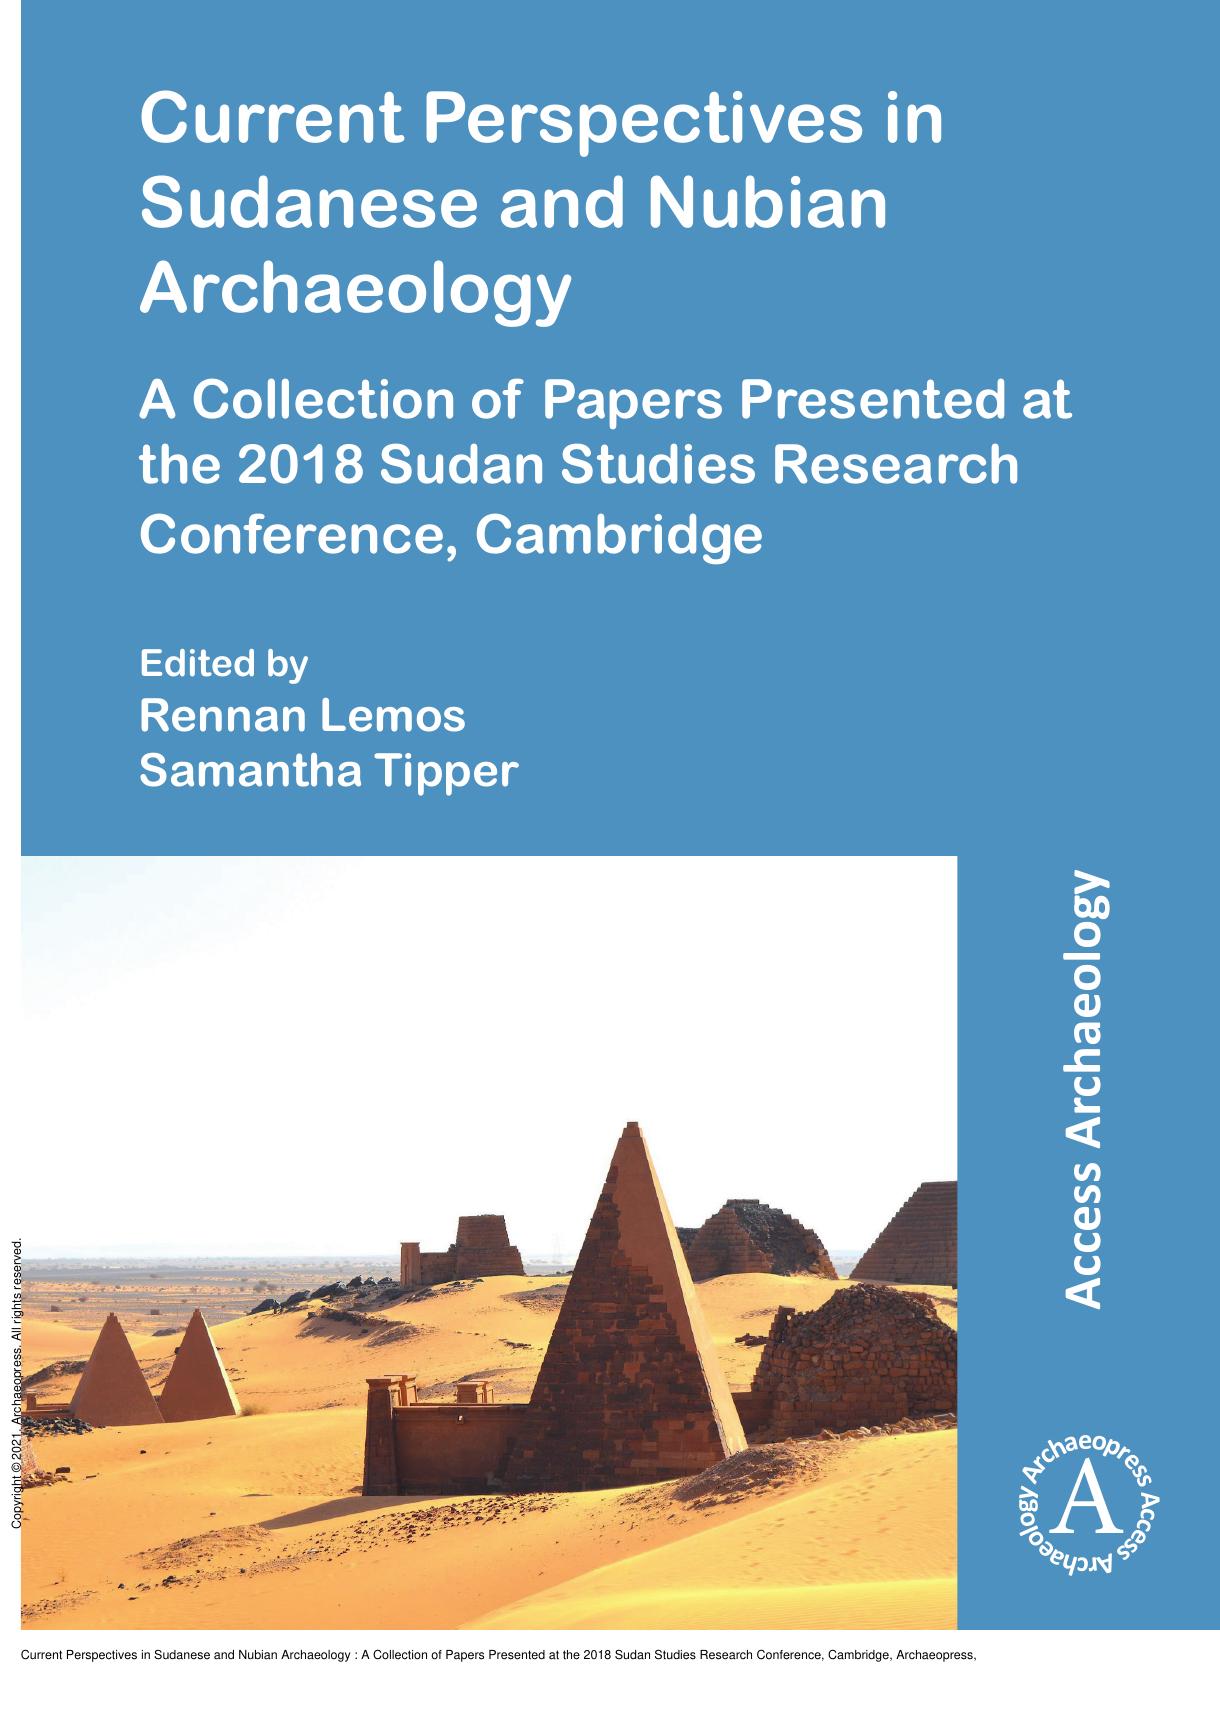 Current Perspectives in Sudanese and Nubian Archaeology : A Collection of Papers Presented at the 2018 Sudan Studies Research Conference, Cambridge by Rennan Lemos; Samantha Tipper